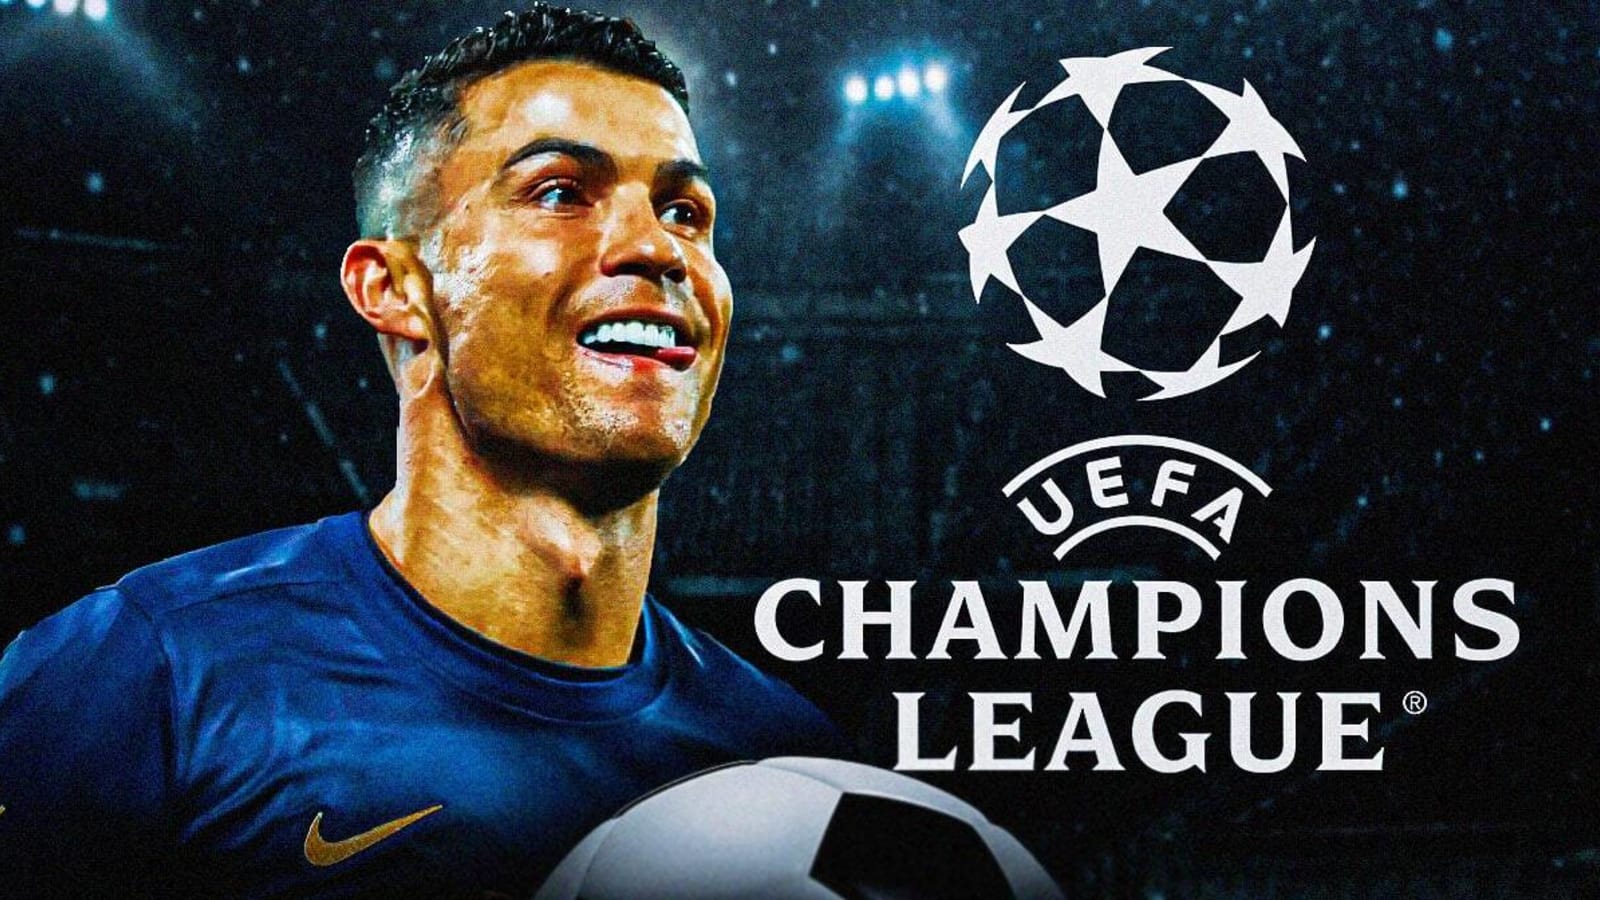 Cristiano Ronaldo linked with a shocking move to a Champions League club